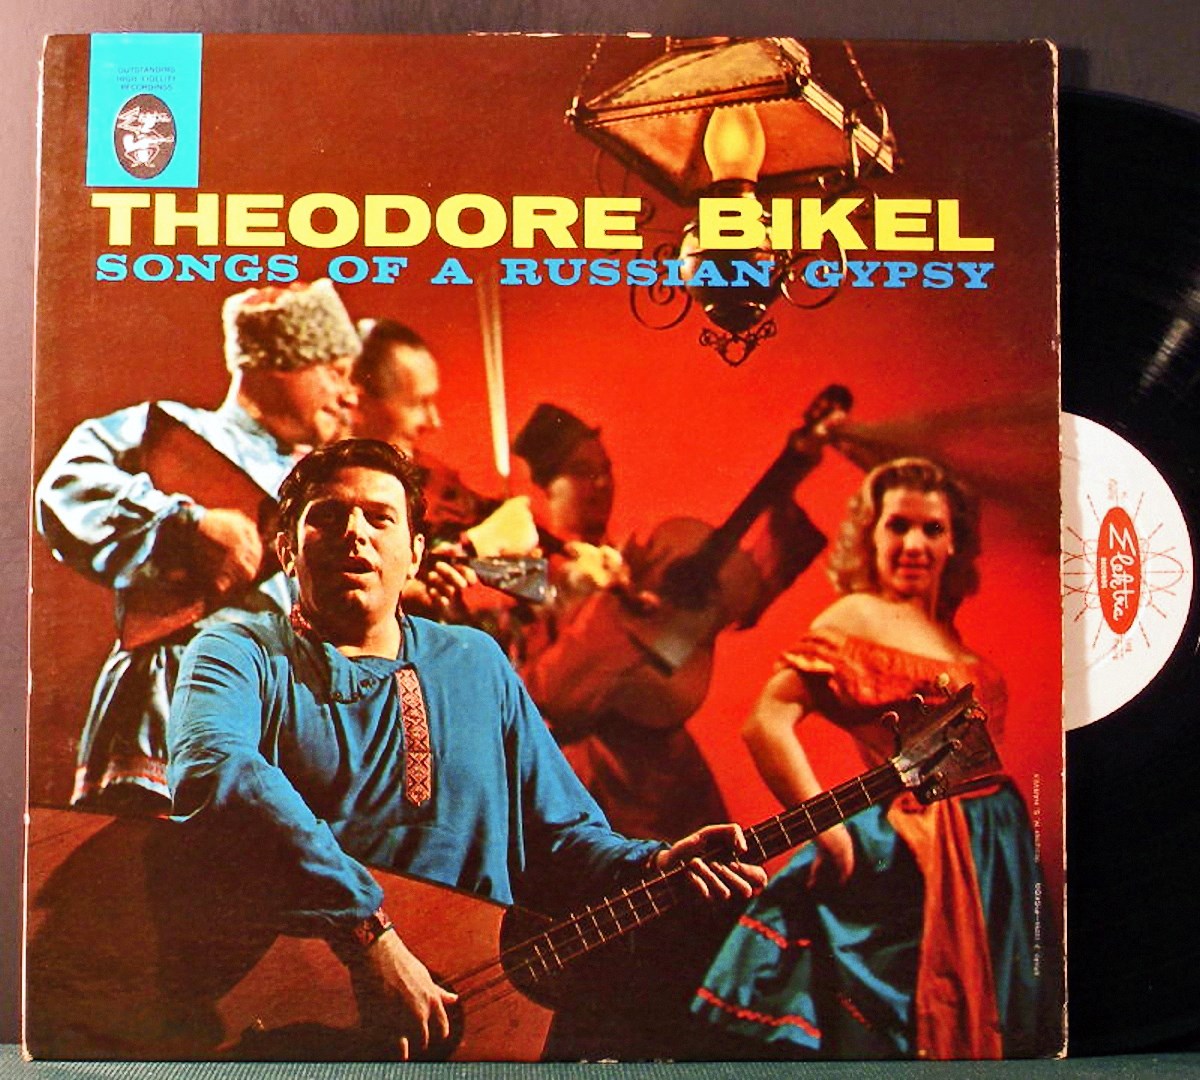 00 theodore bikel. songs of a russian gypsy. 1958